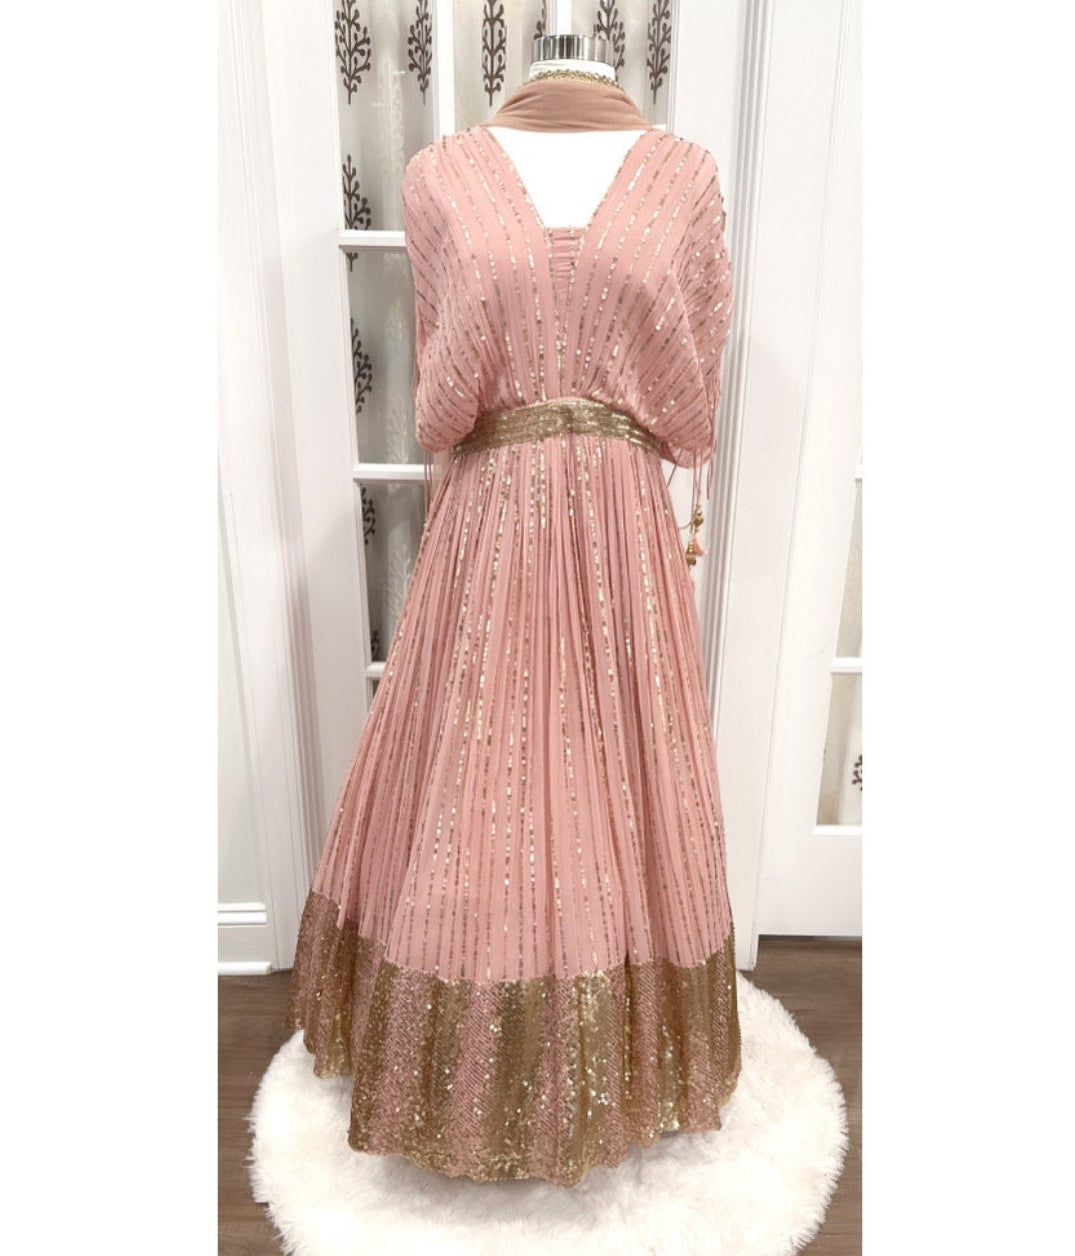 Grand IndoWestern sequin heavy Partywear Gown comes with Dupatta and matching Pant.